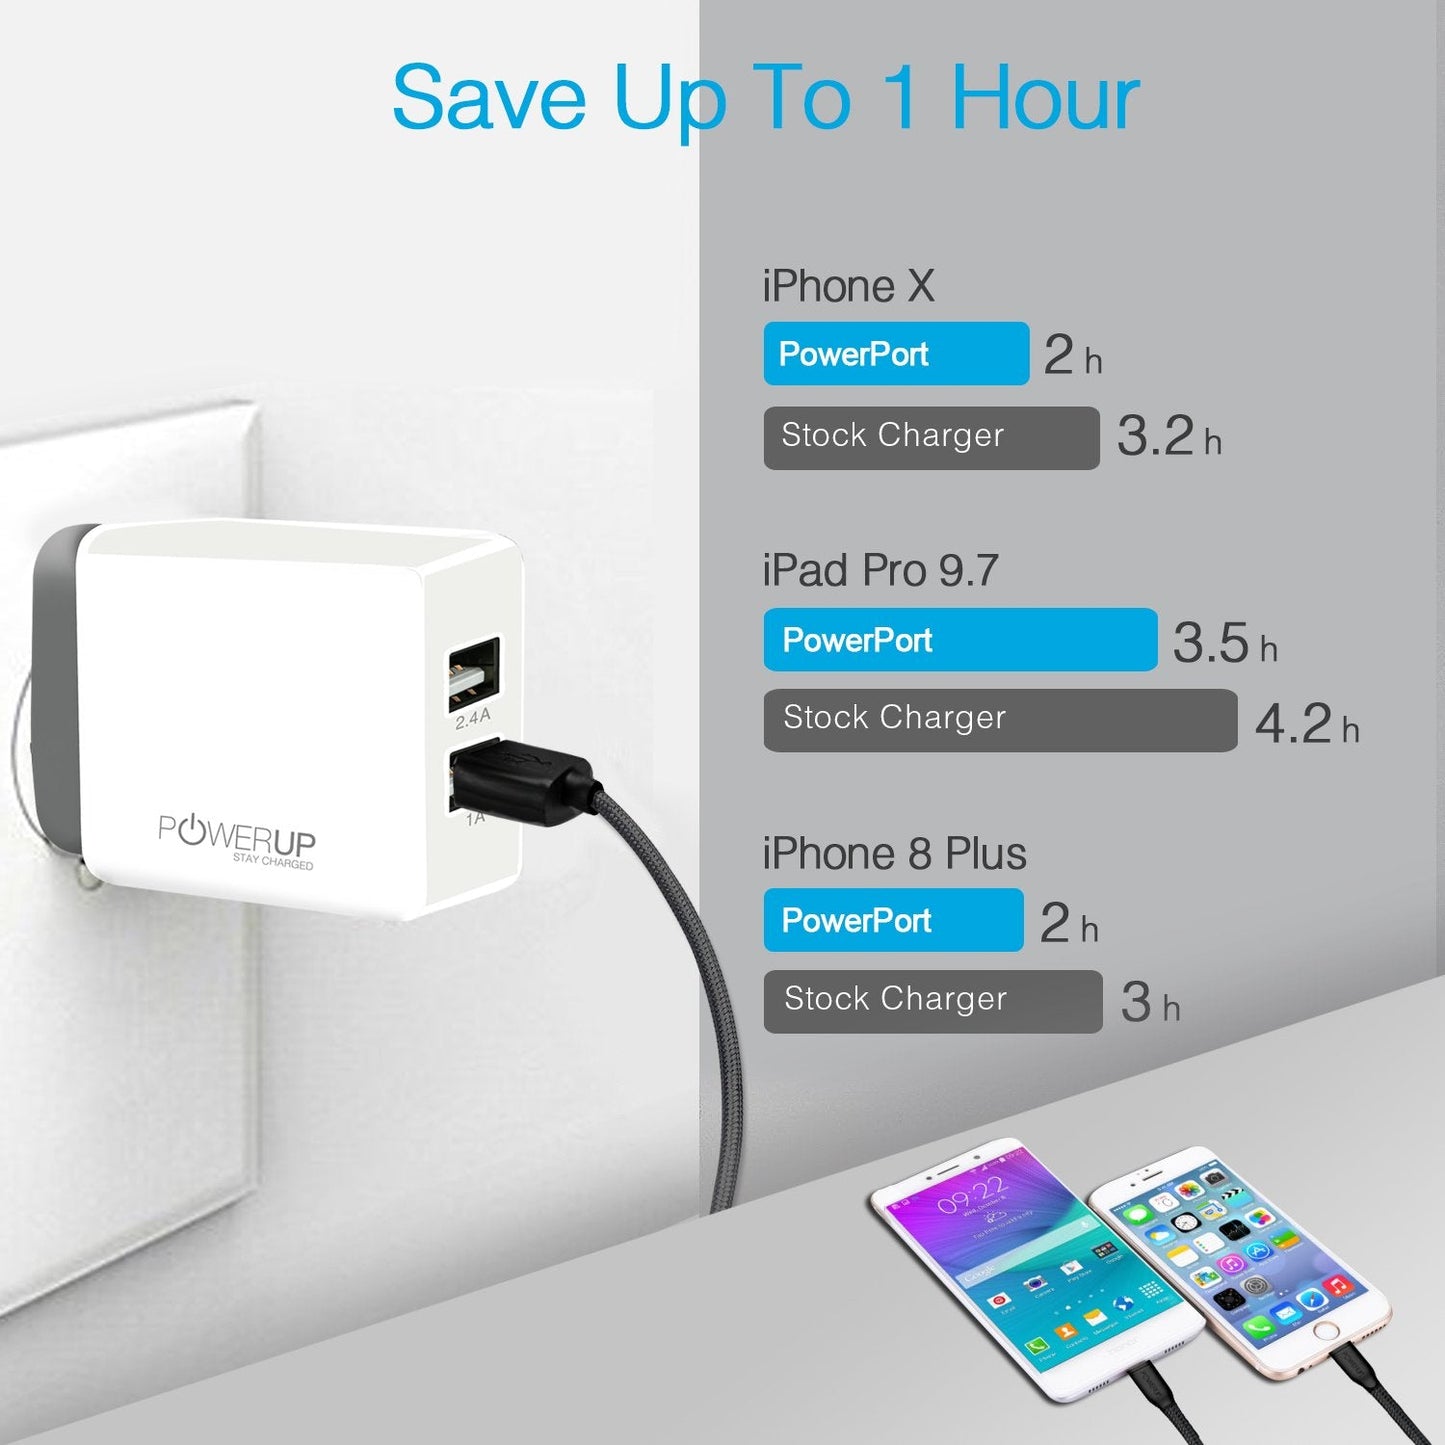 Powerup Amp 3.4a Wall Charger 17w 2usb Port Ultra Smart - White